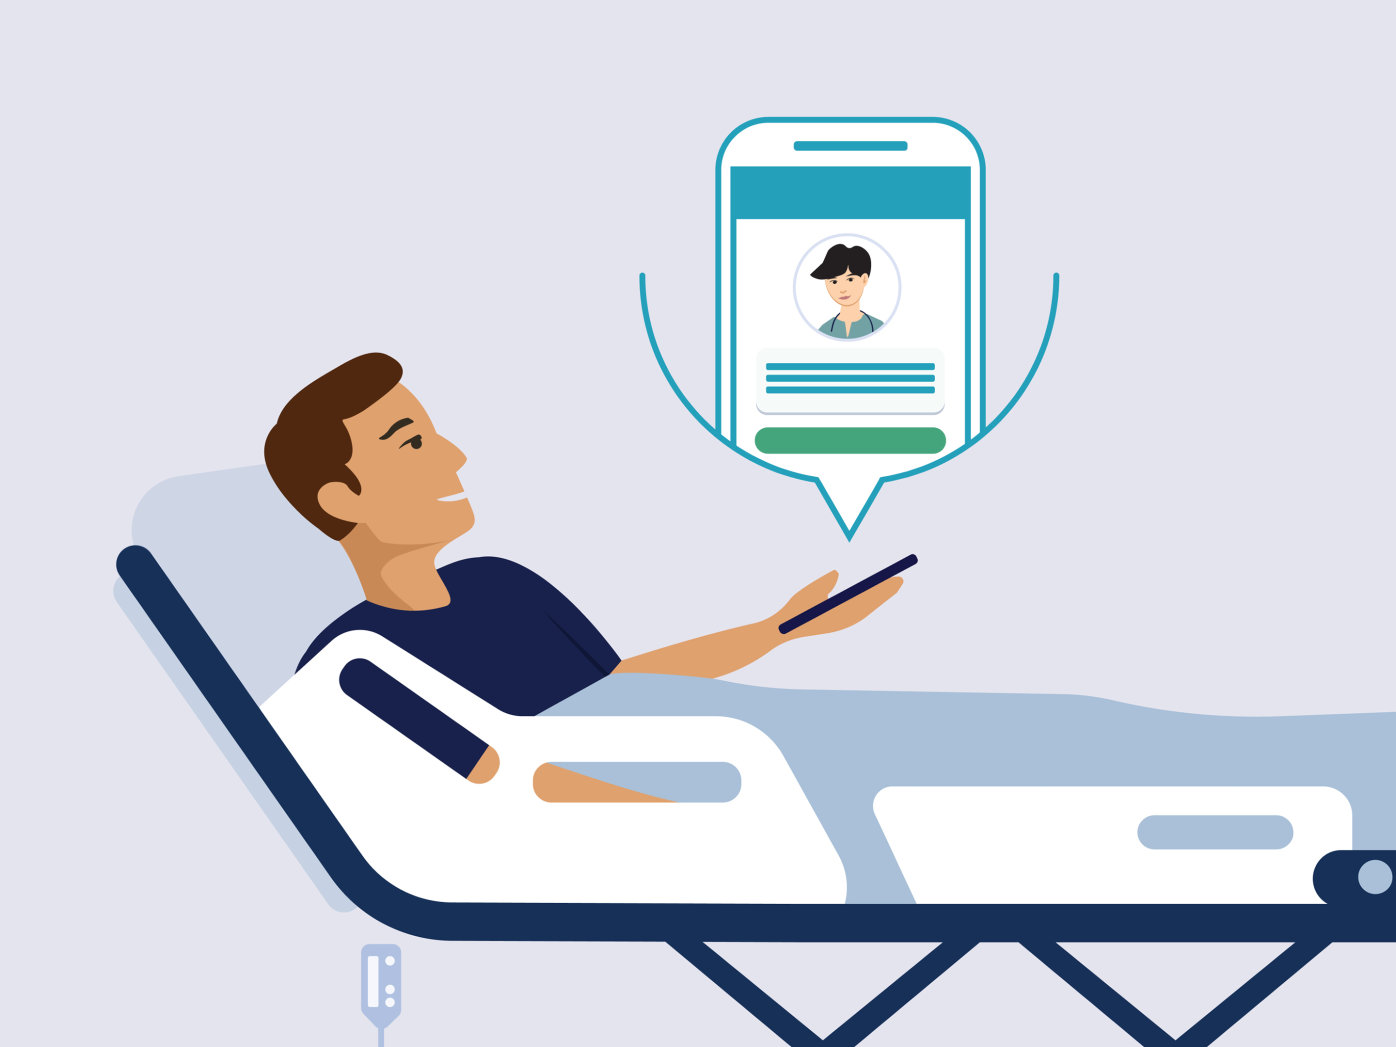 Patient in hospital bed using the Bedside feature on mobile phone to message care provider.